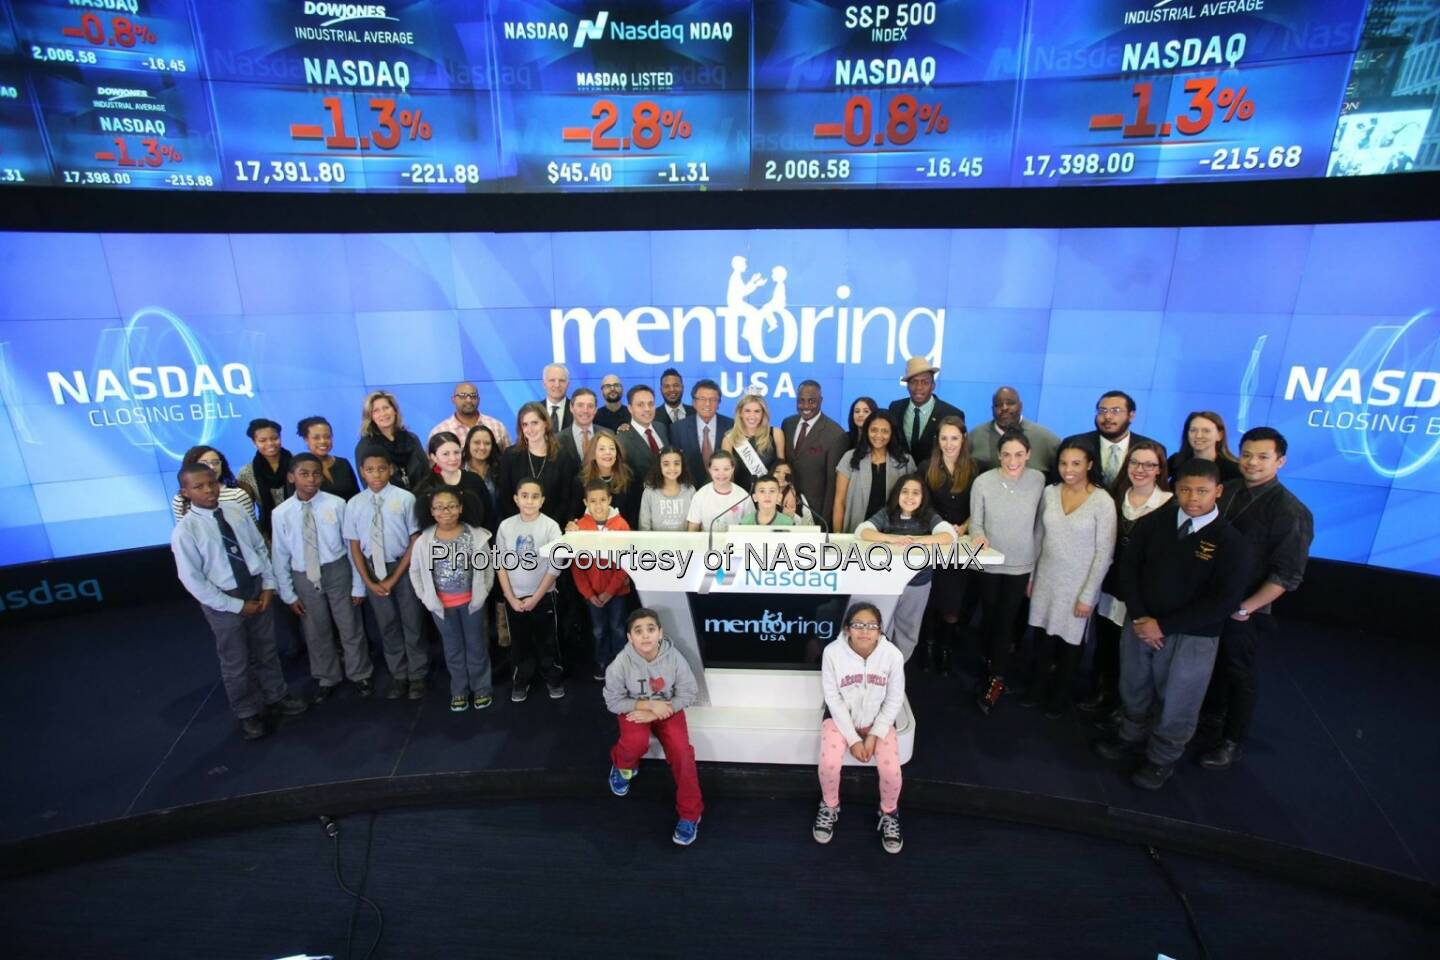 Mentoring USA rang the Nasdaq Closing Bell along with Miss New York USA, Kenneth Cole, PIX 11 BigBrothers BigSisters Citizen Schools and Eagle Academy for Young Men | Newark #NationalMentoringMonth  Source: http://facebook.com/NASDAQ